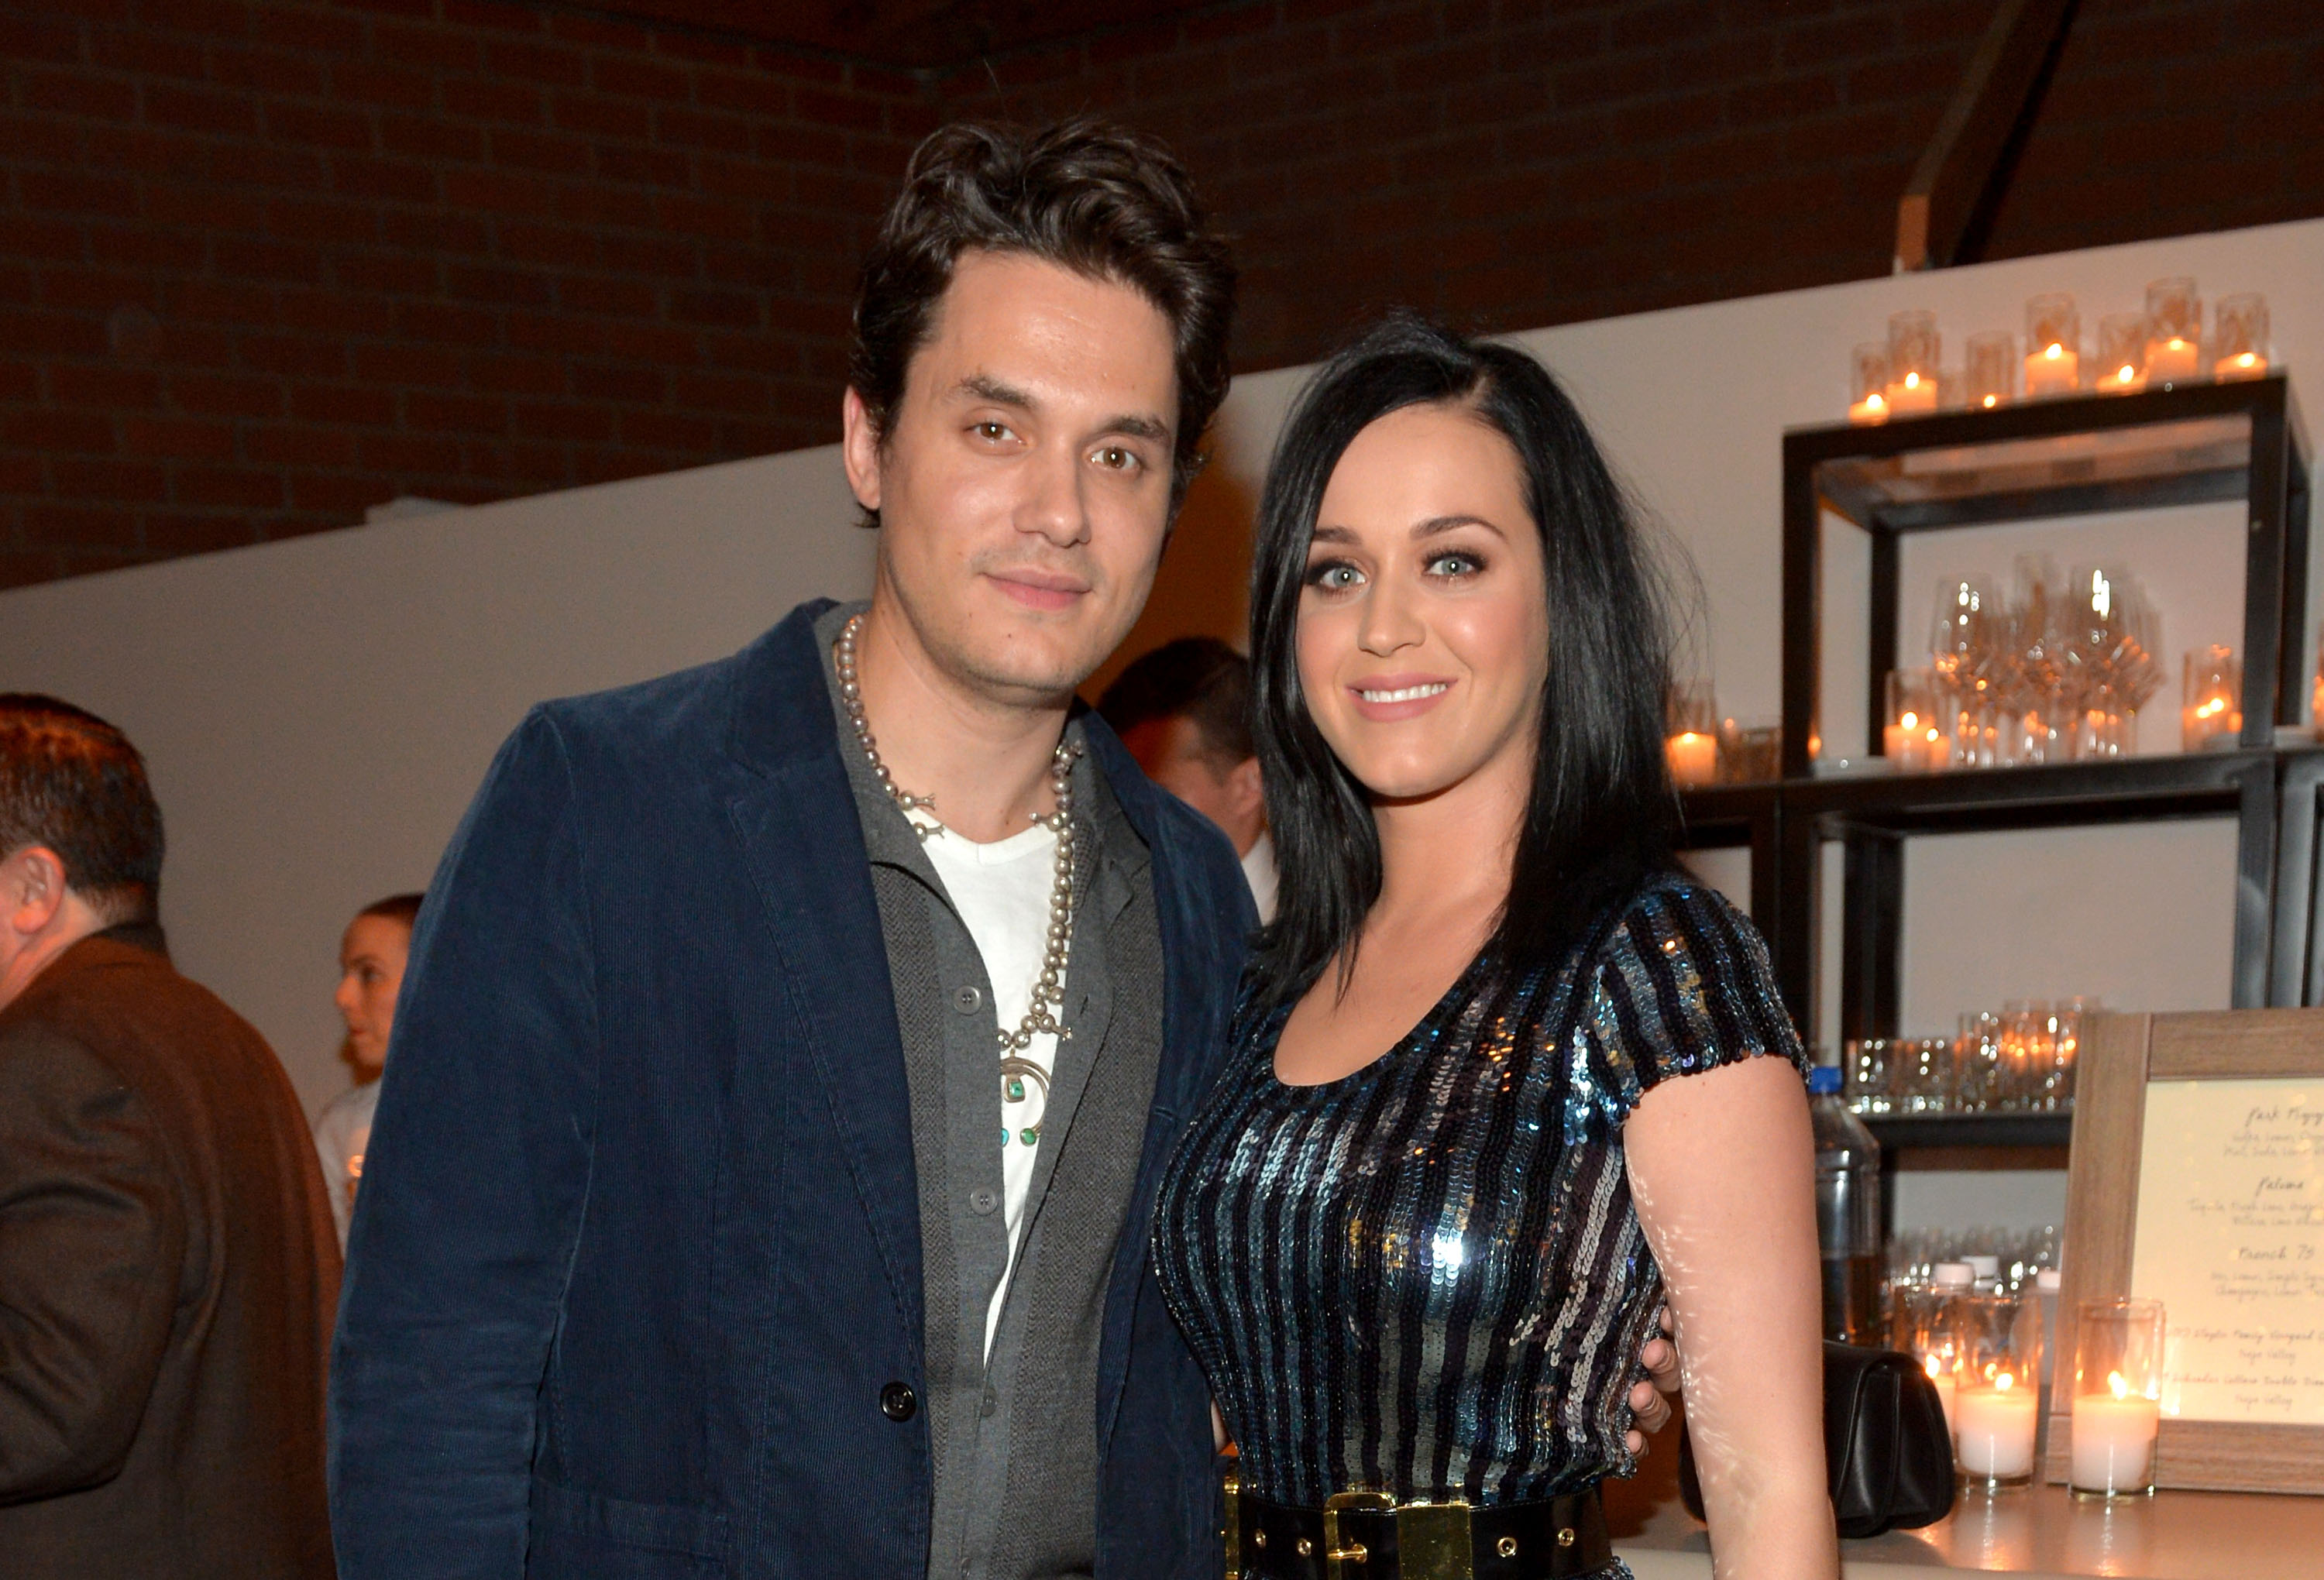 Musician John Mayer and singer Katy Perry on January 28 2014 in Culver City California | Source: Getty Images